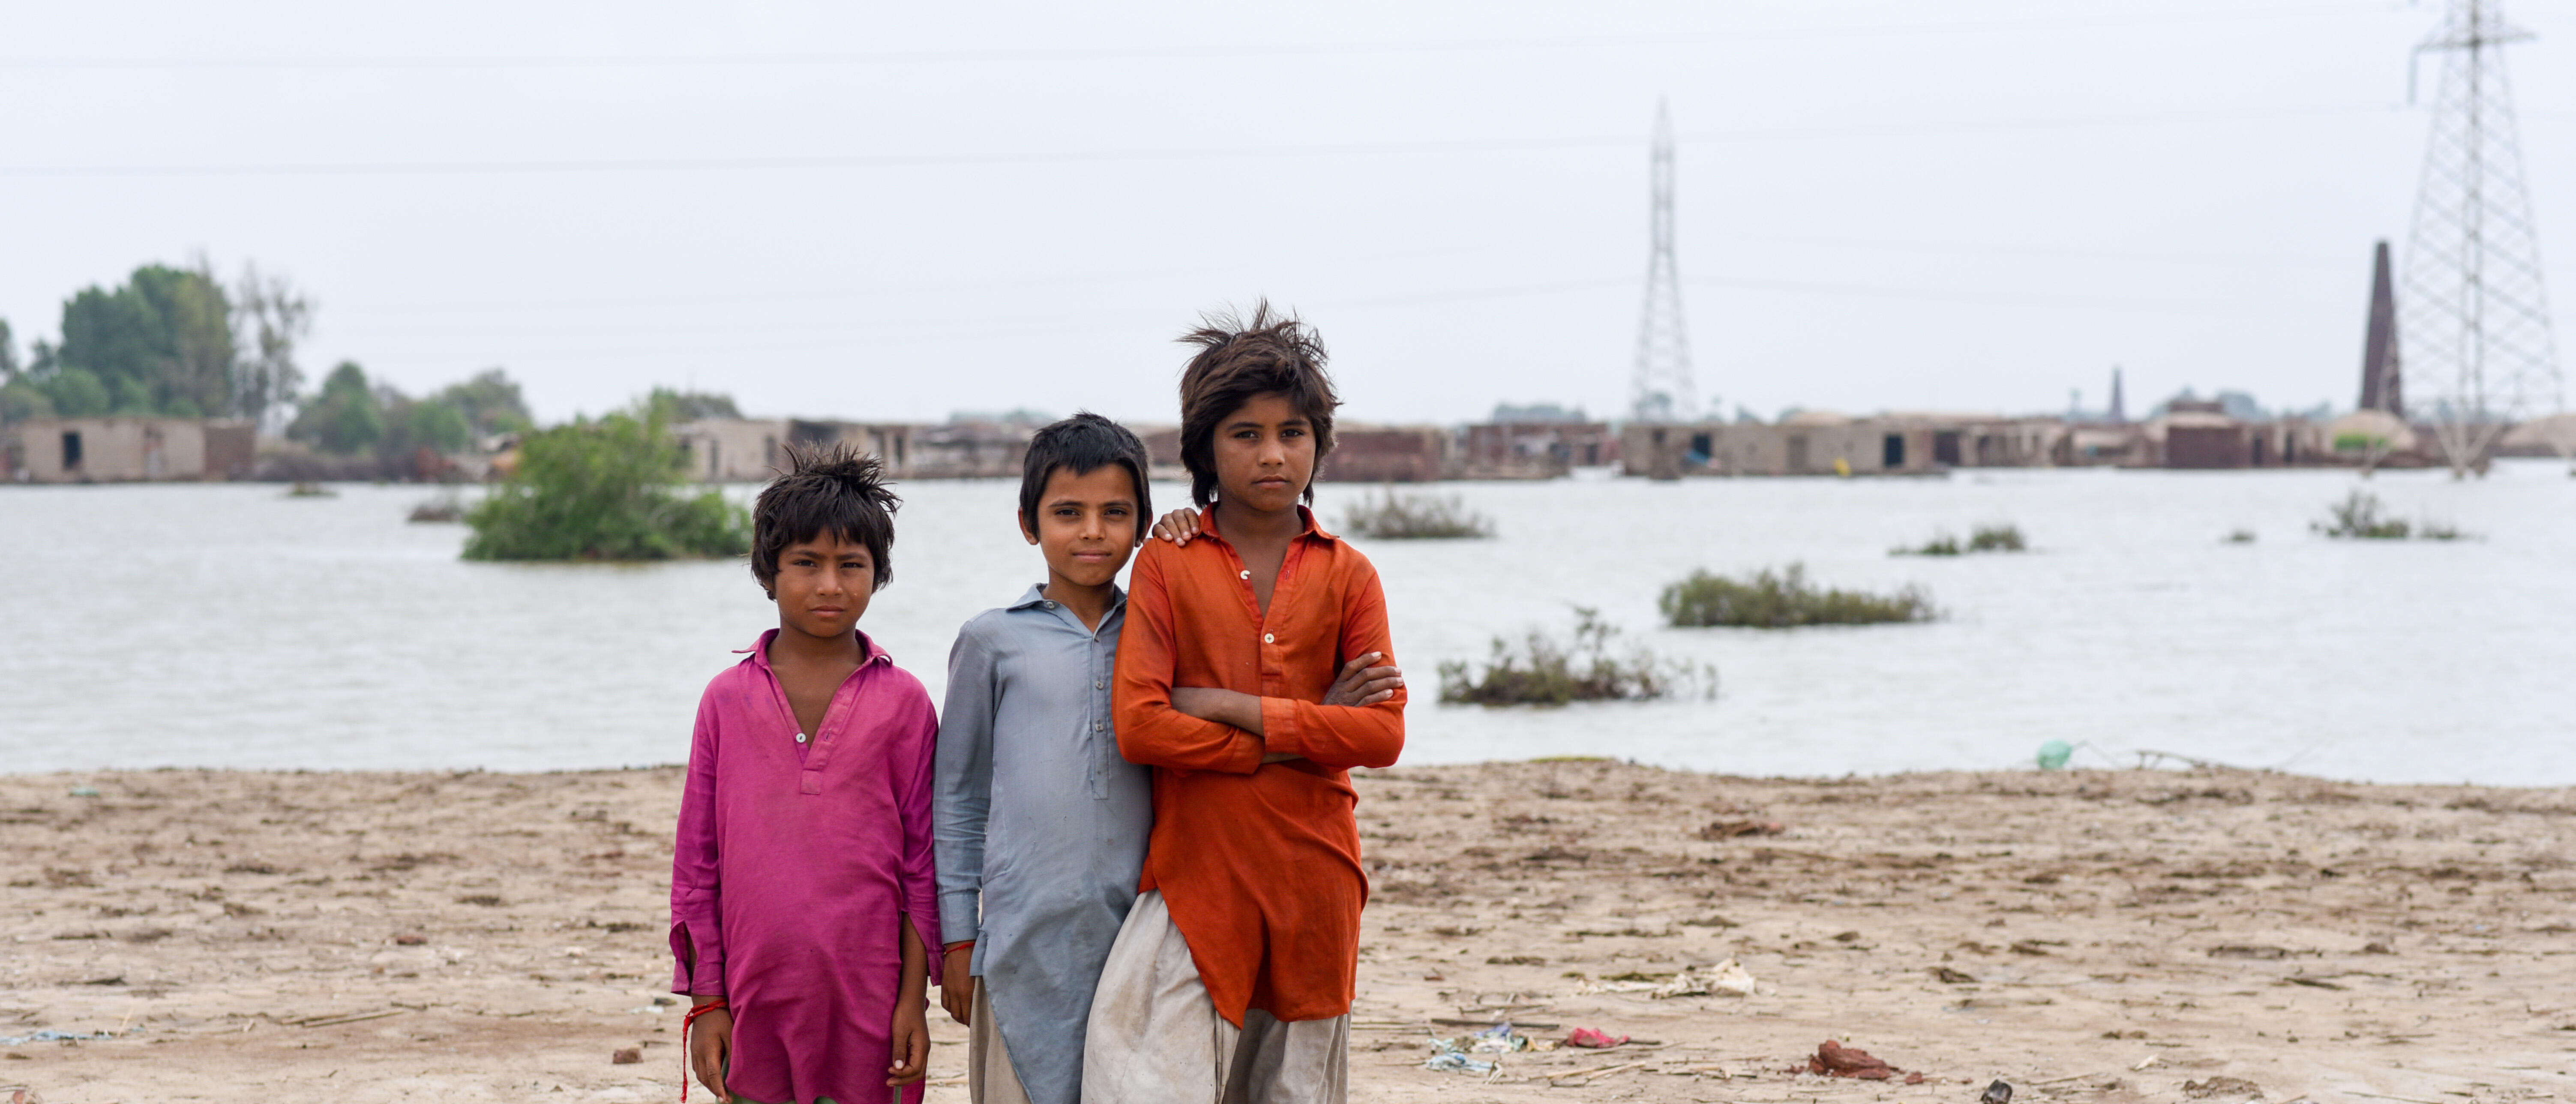 Three children pose for a photo in front of a community impacted by flooding.